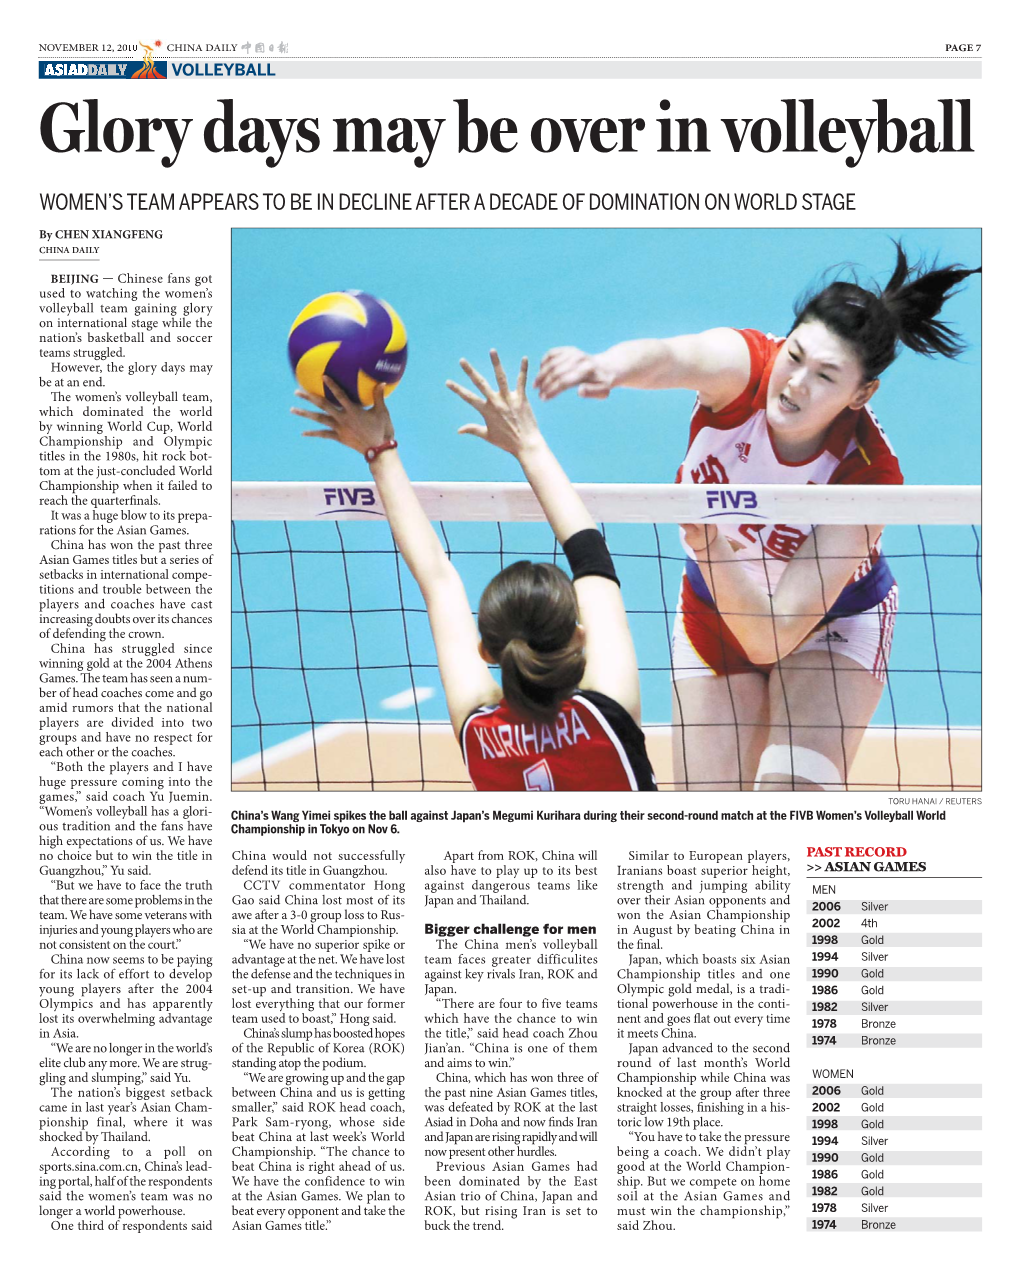 Glory Days May Be Over in Volleyball